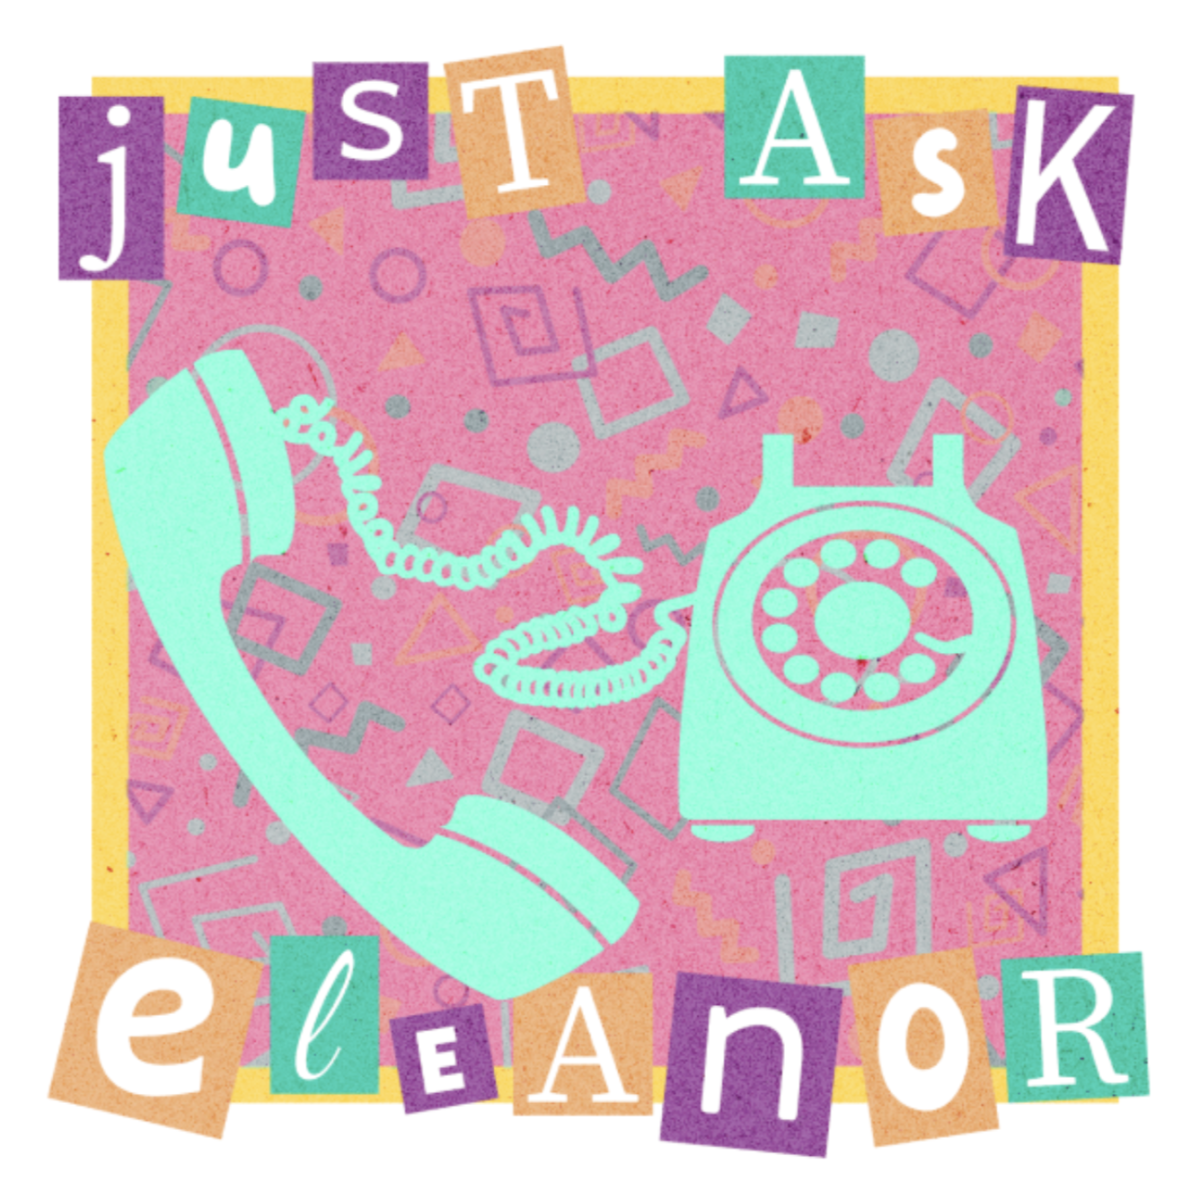 Just+Ask+Eleanor+Podcast+Cover.+Design+by+Caitlin+Morey.